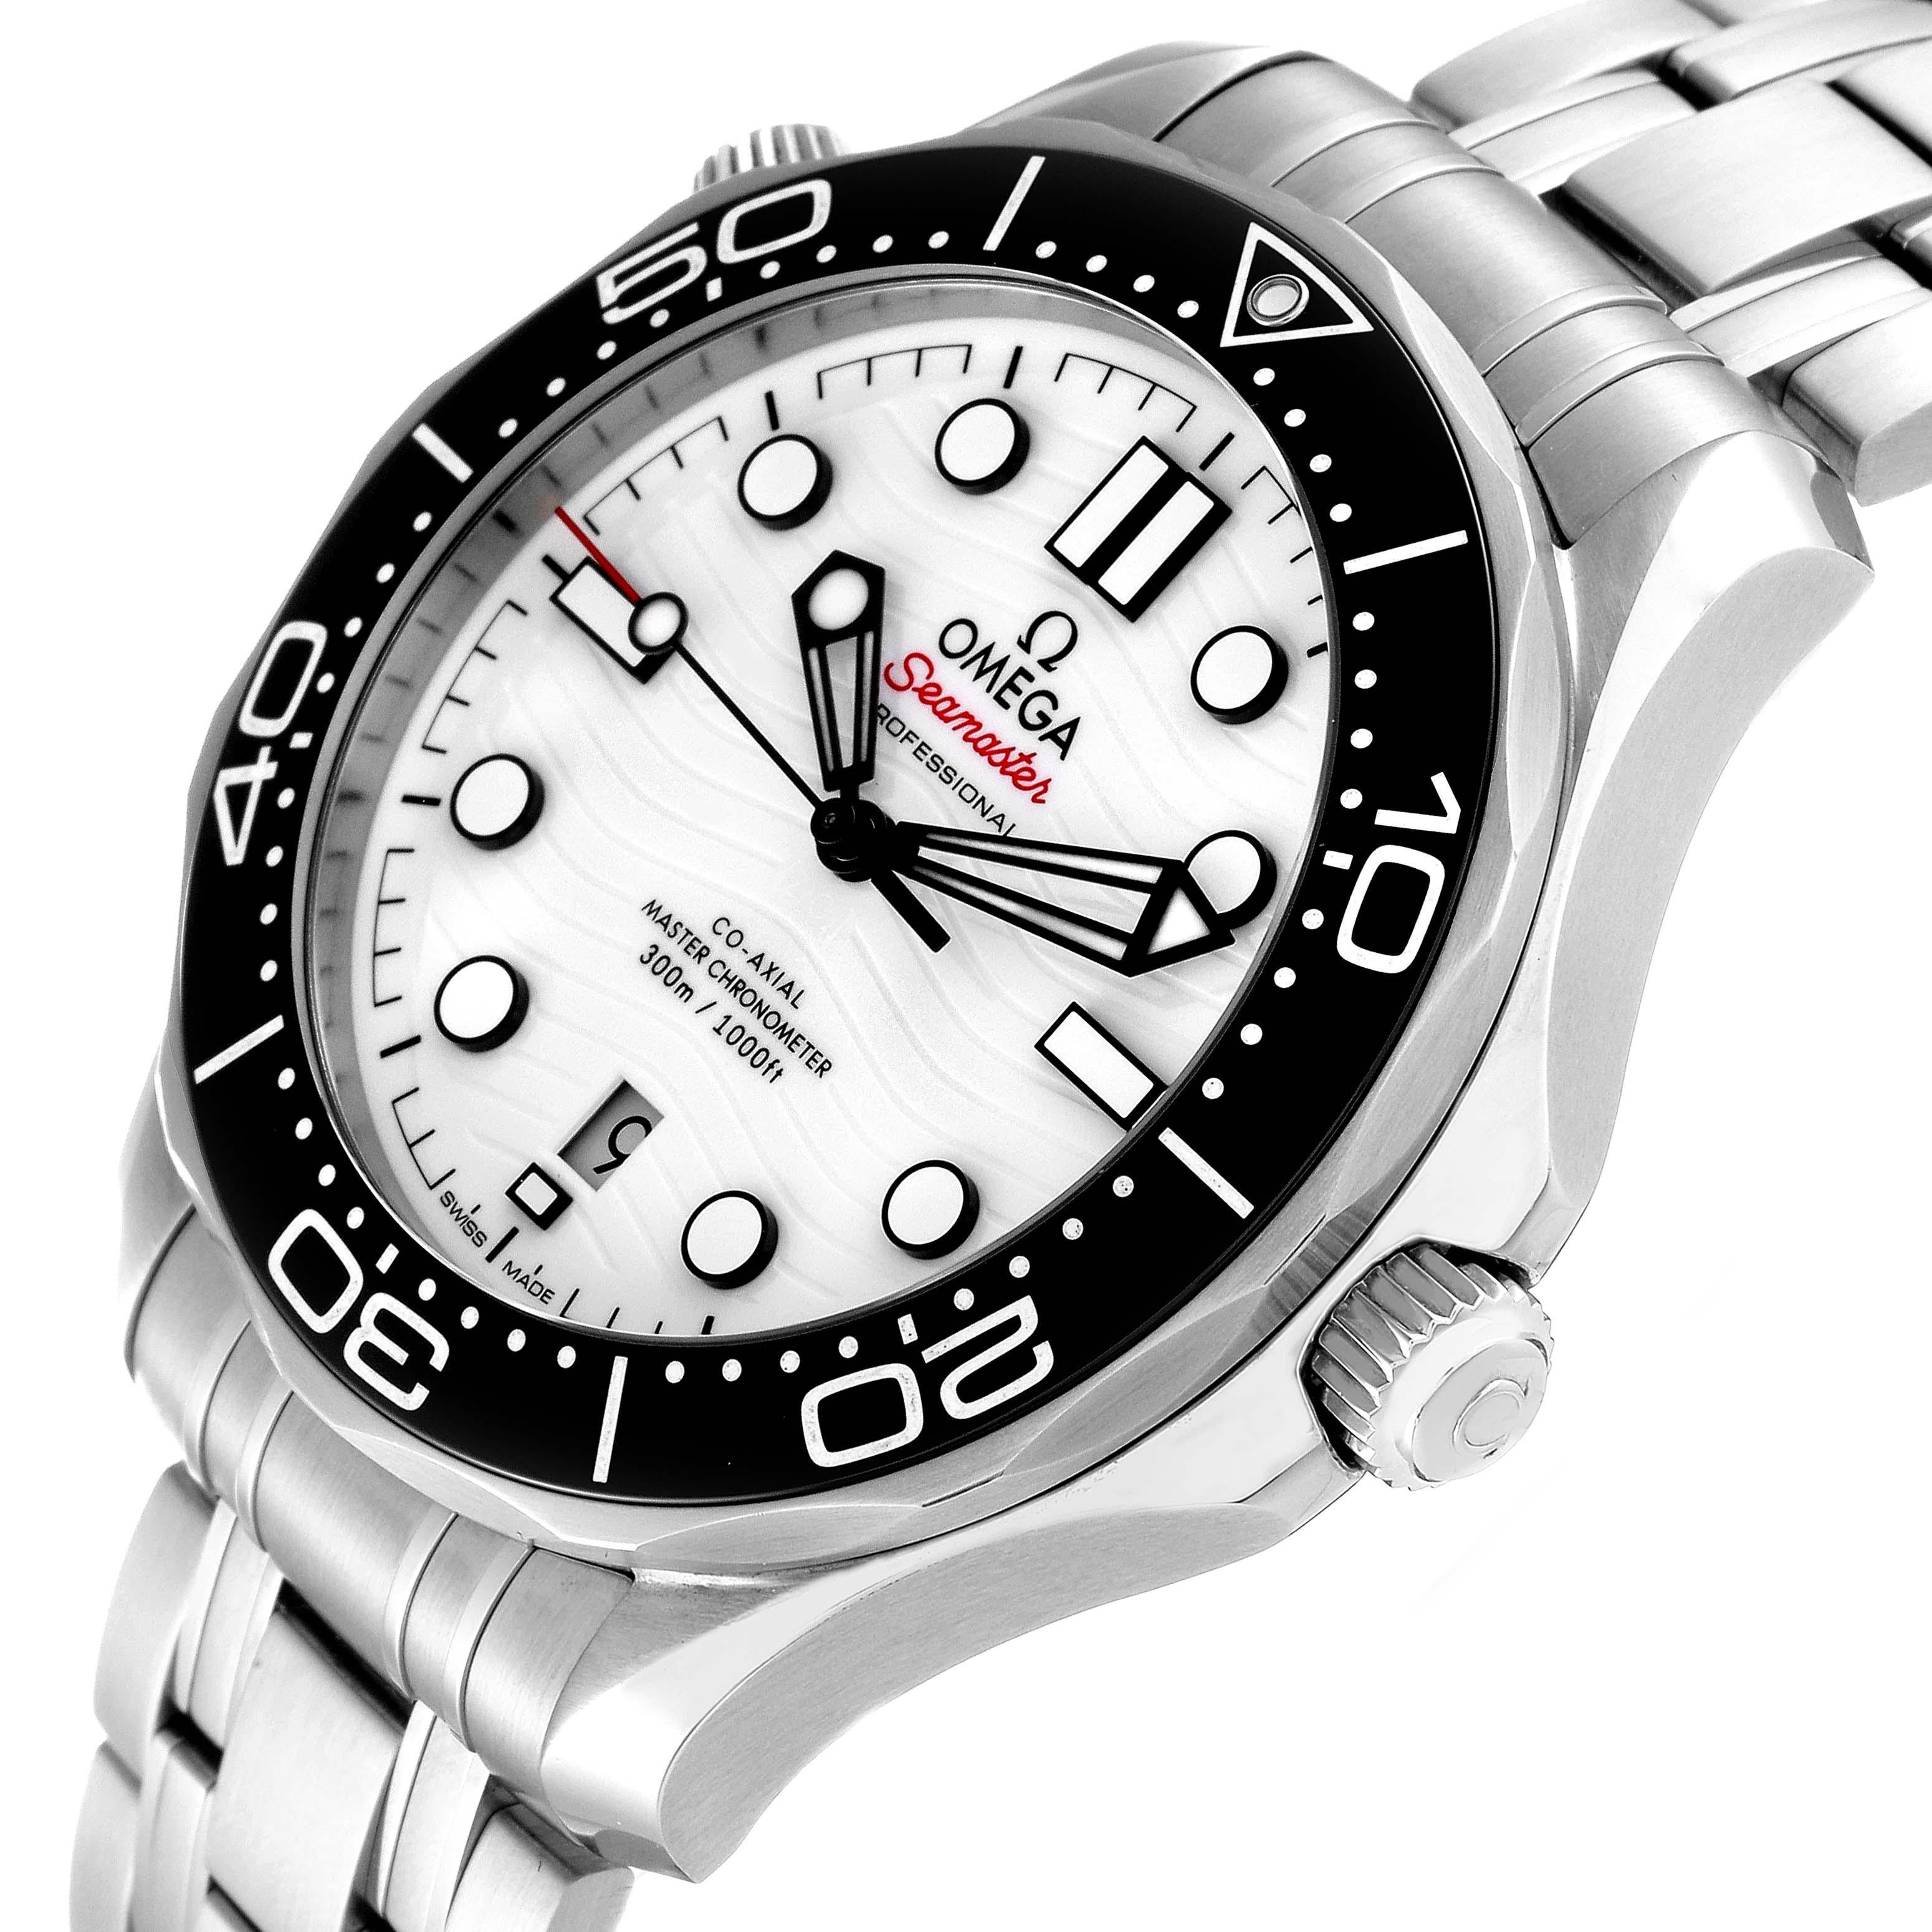 Omega Seamaster Diver 300M Steel Mens Watch 210.30.42.20.04.001 Box Card. Automatic self-winding chronometer, Co-Axial Escapement movement with rhodium-plated finish. Stainless steel case 42.0 mm in diameter. Helium escape valve at 10 o'clock. Omega